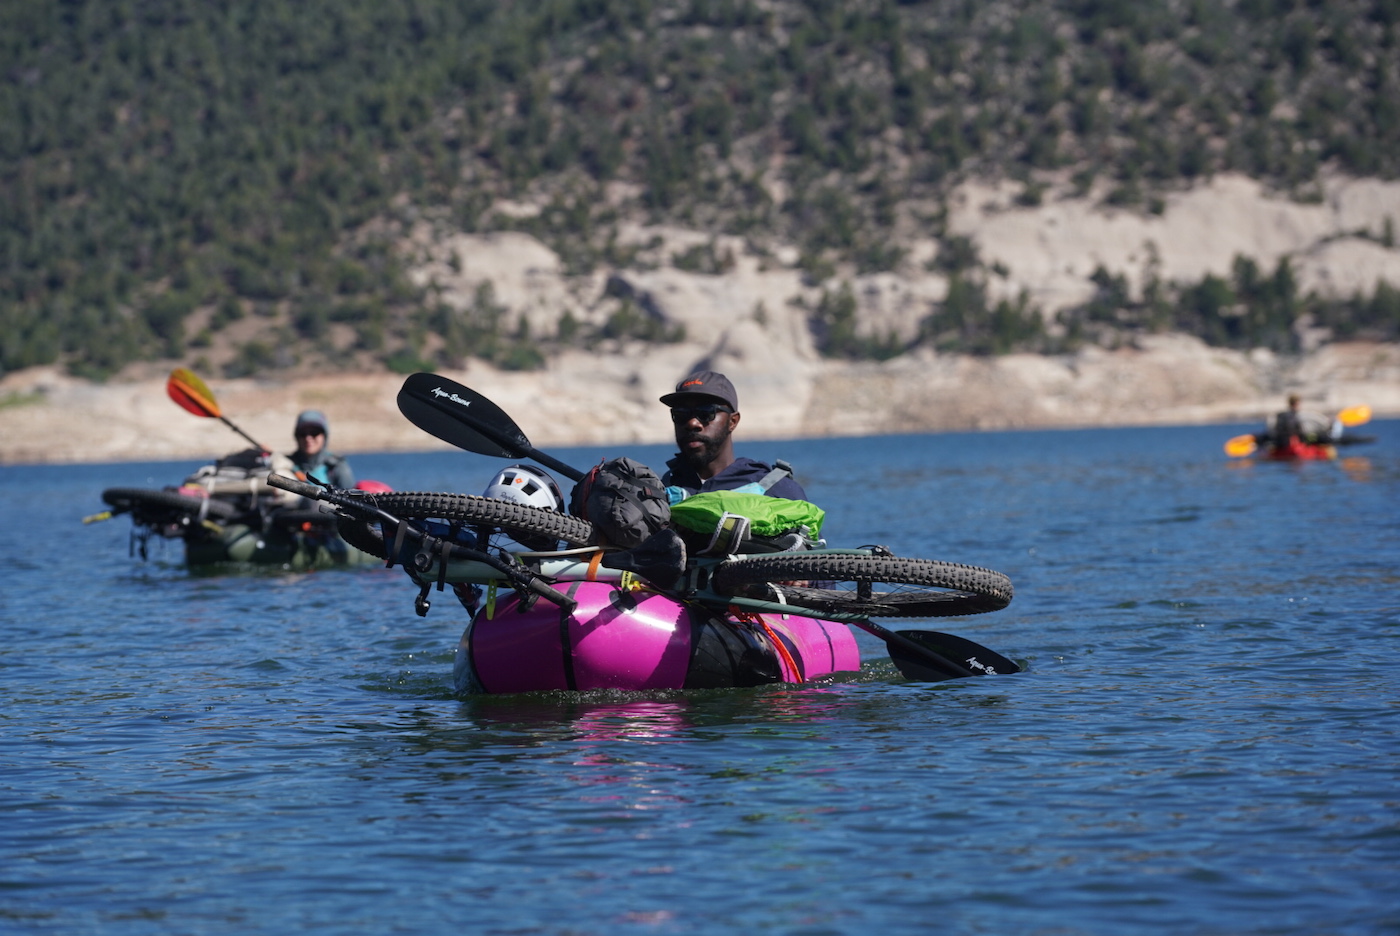 How to lash a bike to a packraft